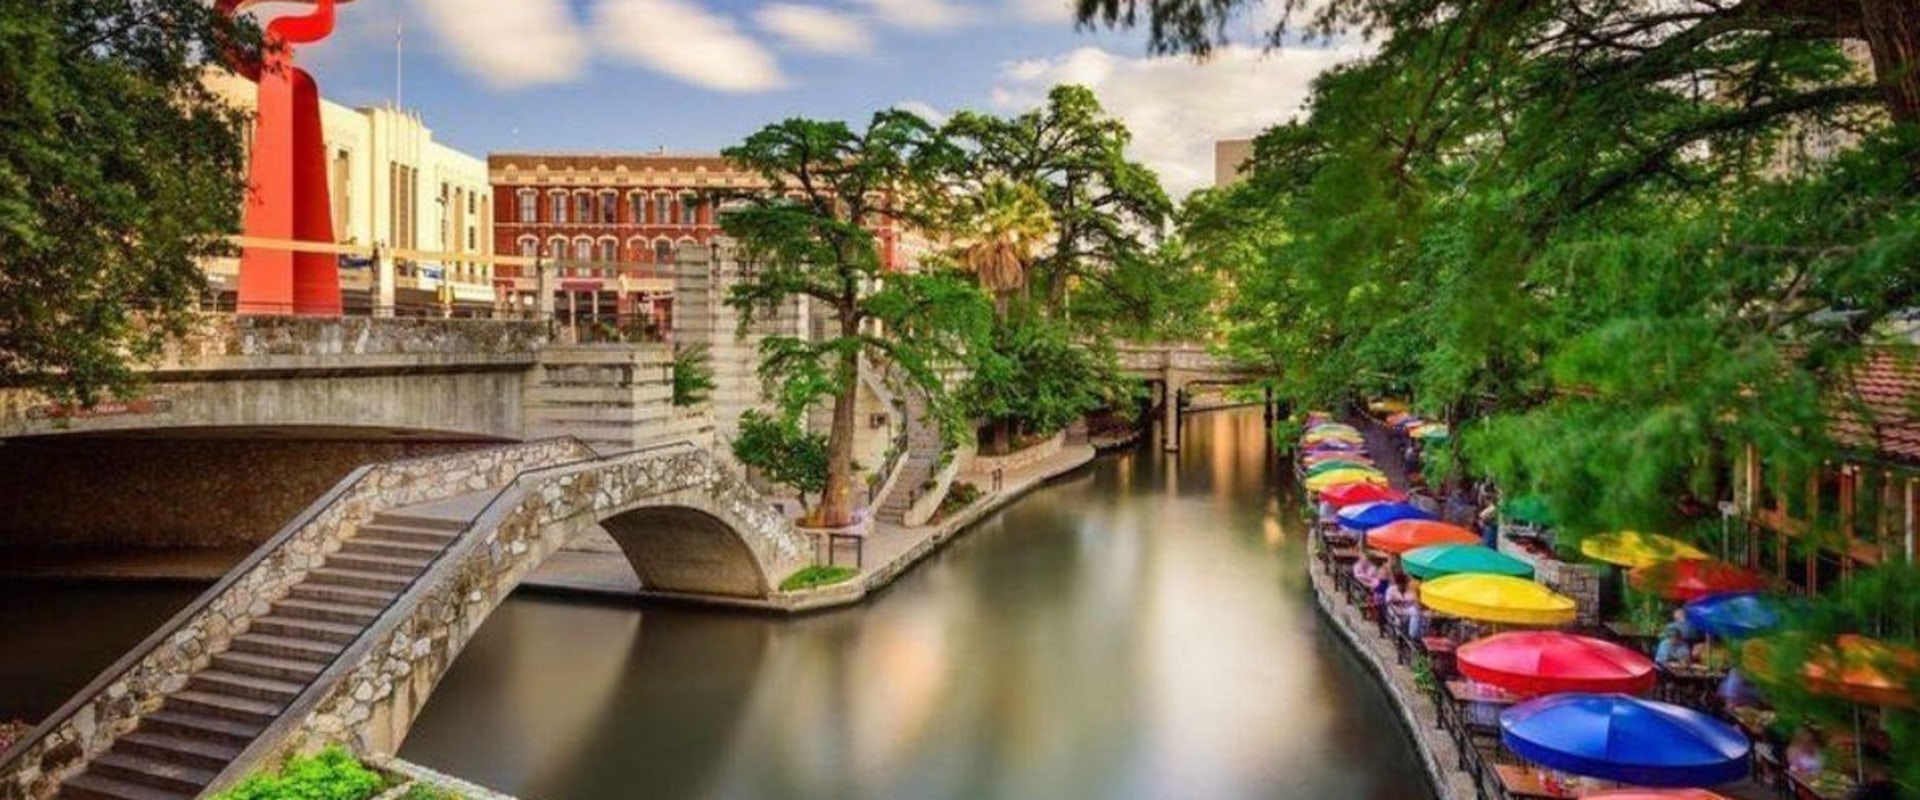 Where does san antonio rank in best cities to live?